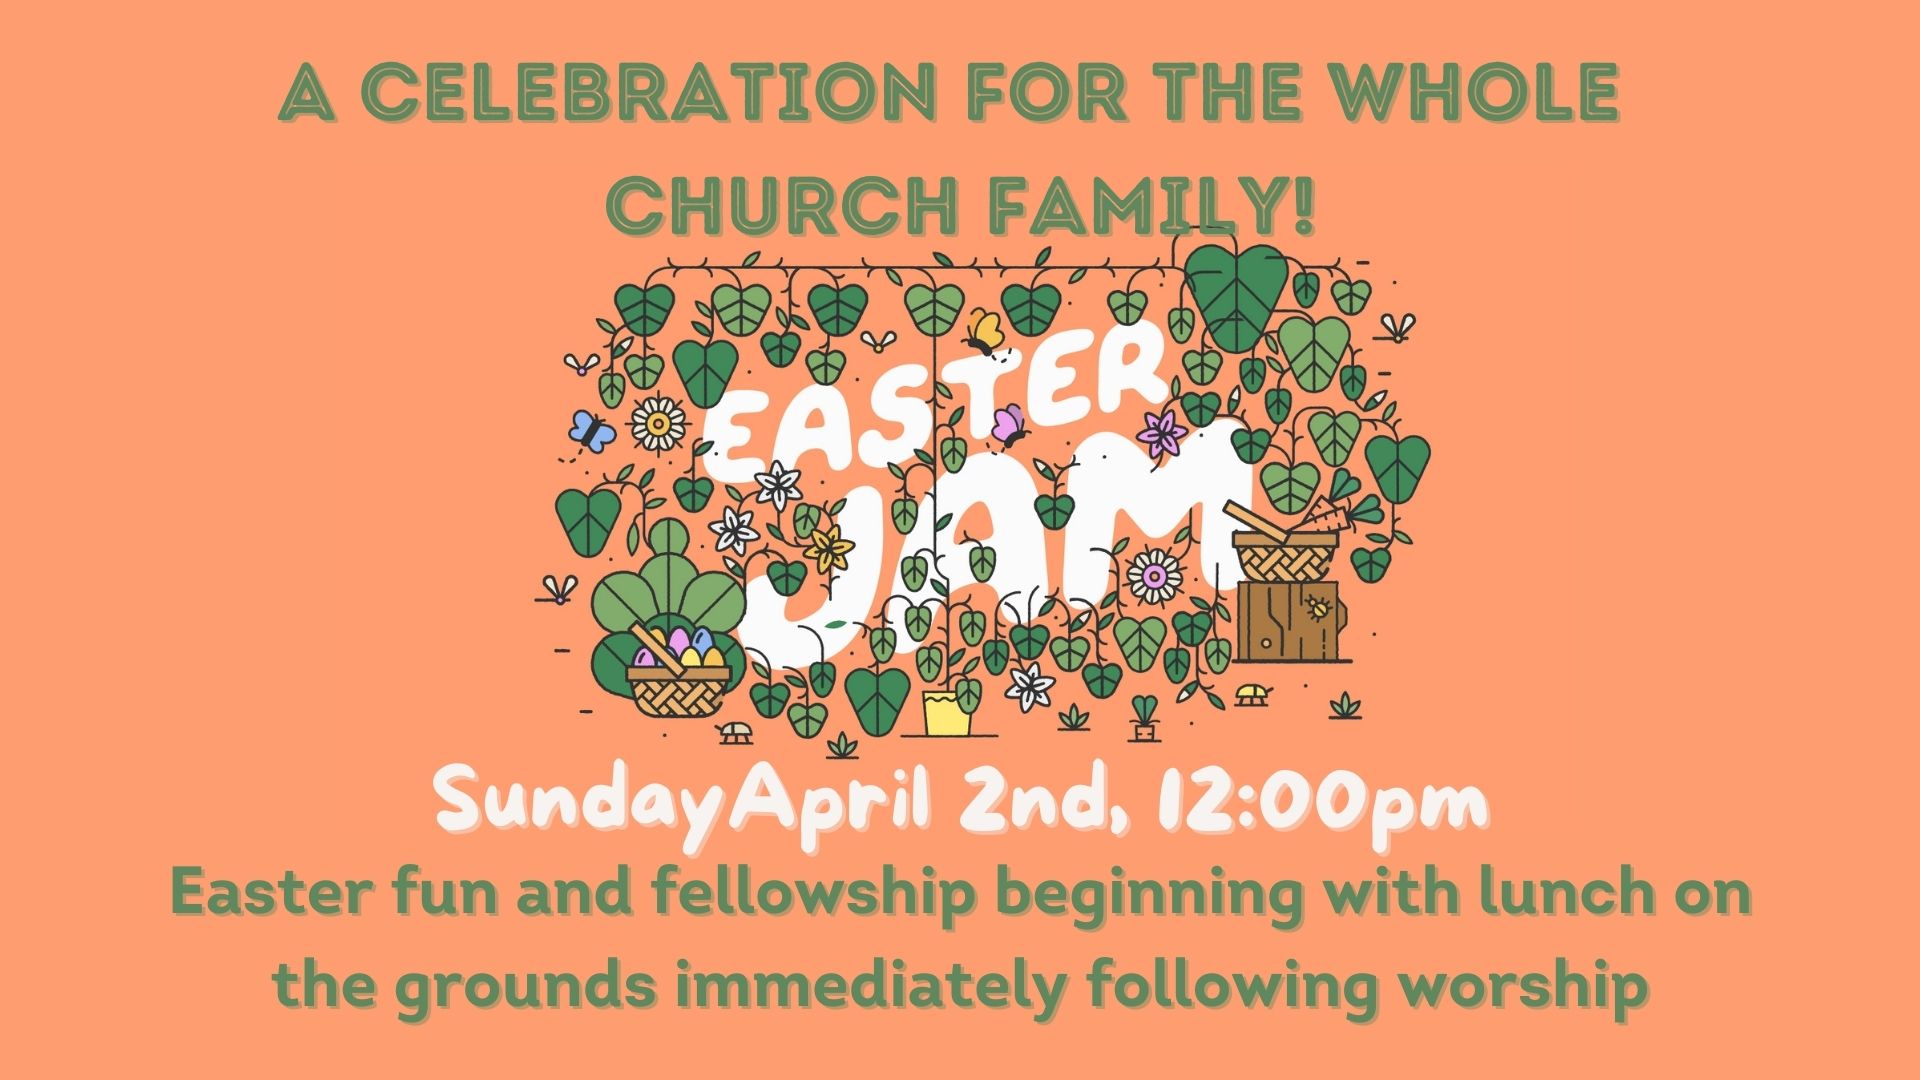 A Celebration for the Whole Church Family!